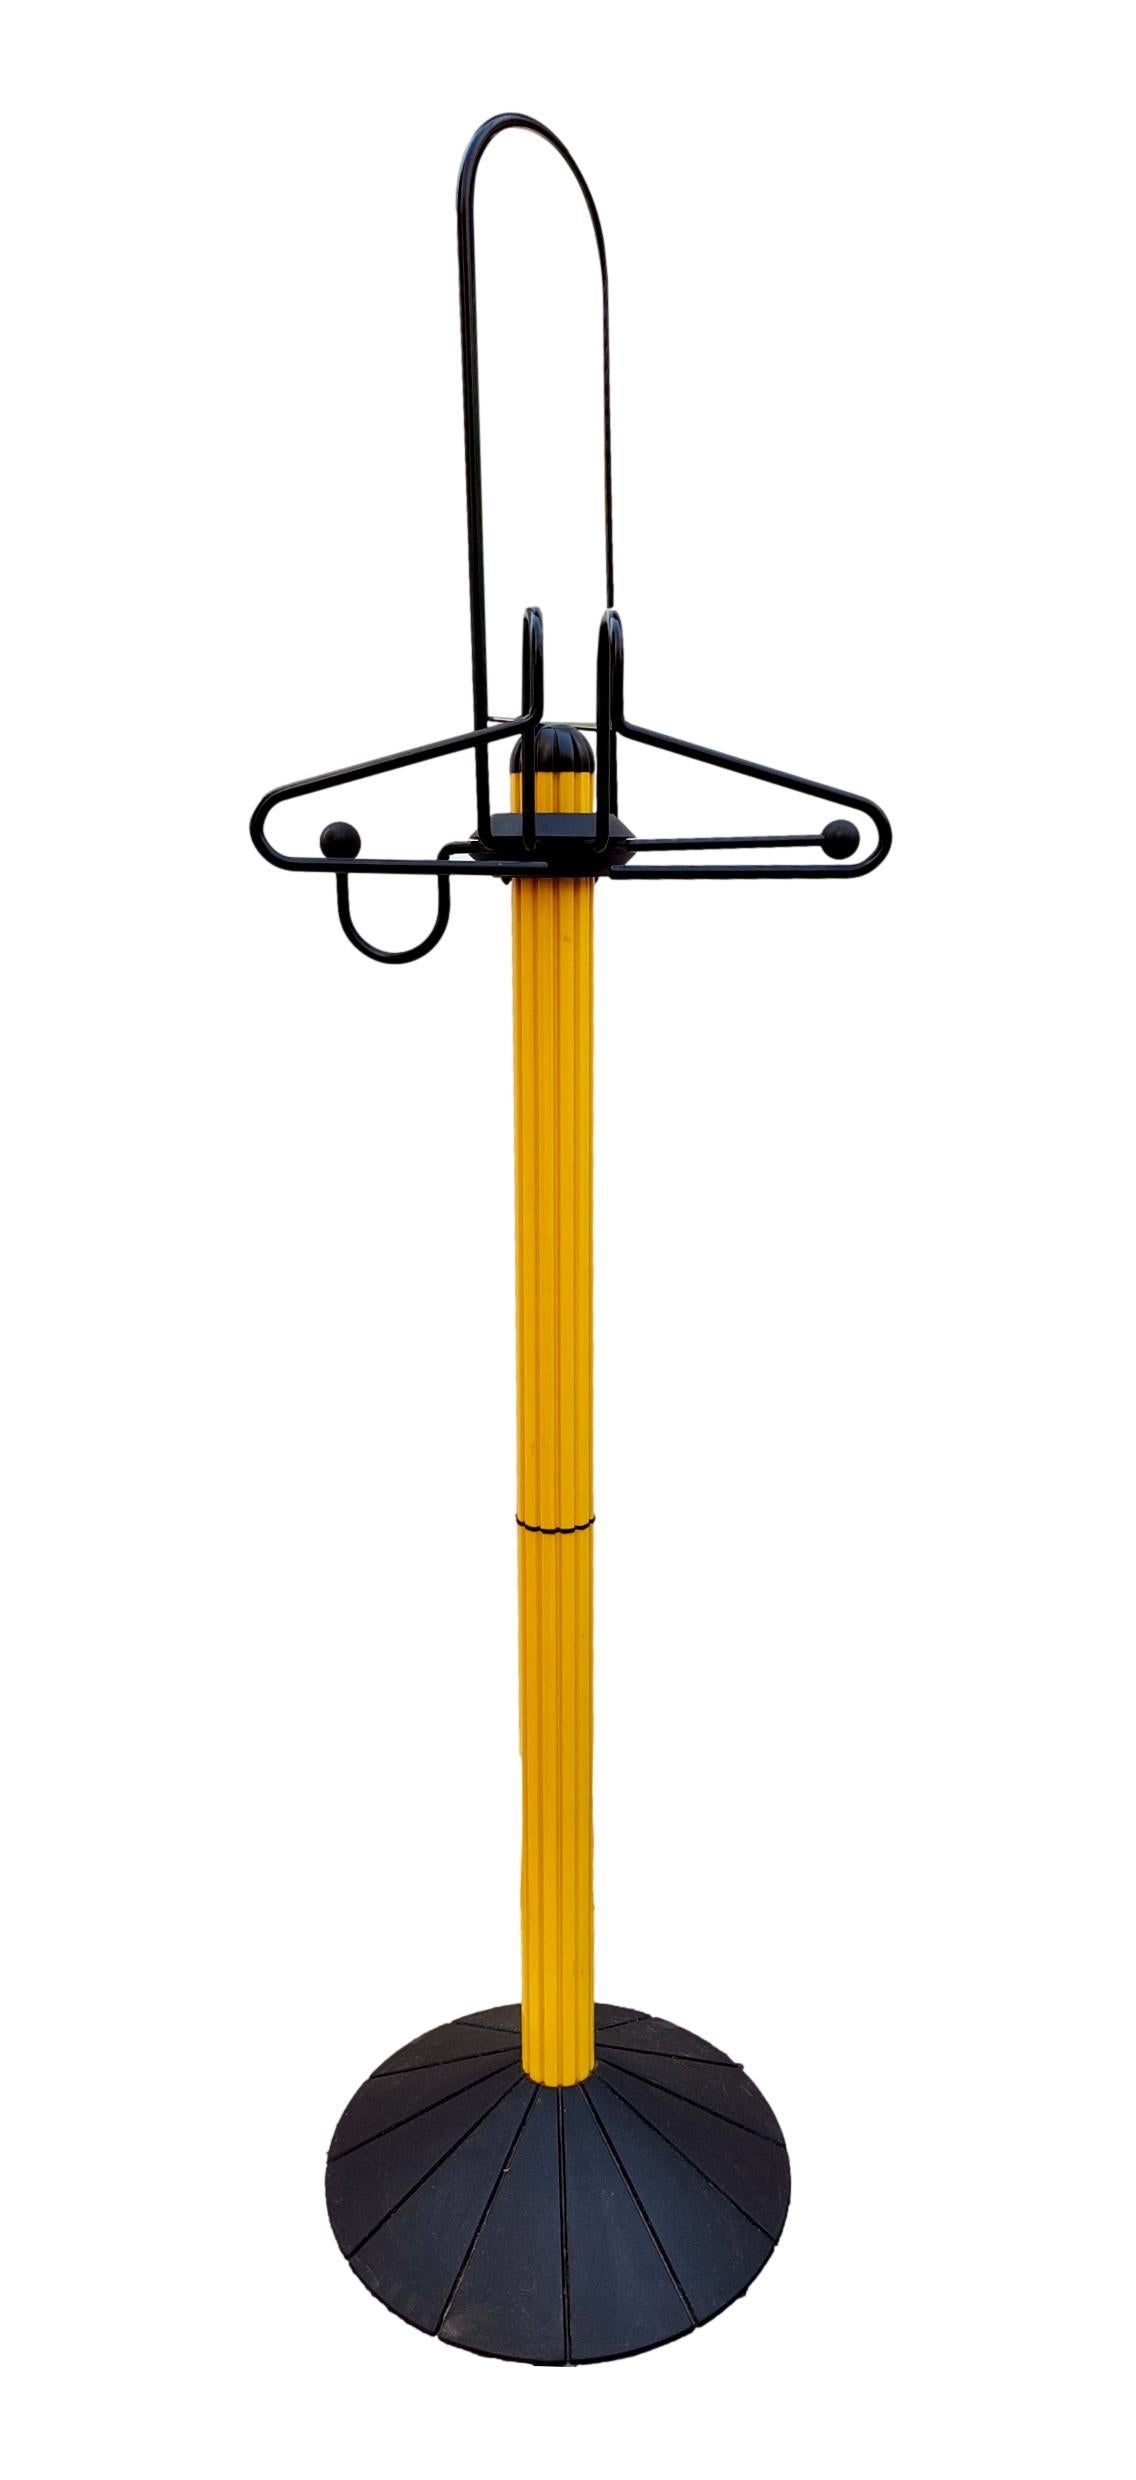 Rare coat rack with mirror production Seccose original 70s designed by Zambusi, Gigante and Boccato.
Made of bright yellow metal with rubber elements and upper mirror and black plastic base.
Measuring about 185 cm in height for a lateral footprint